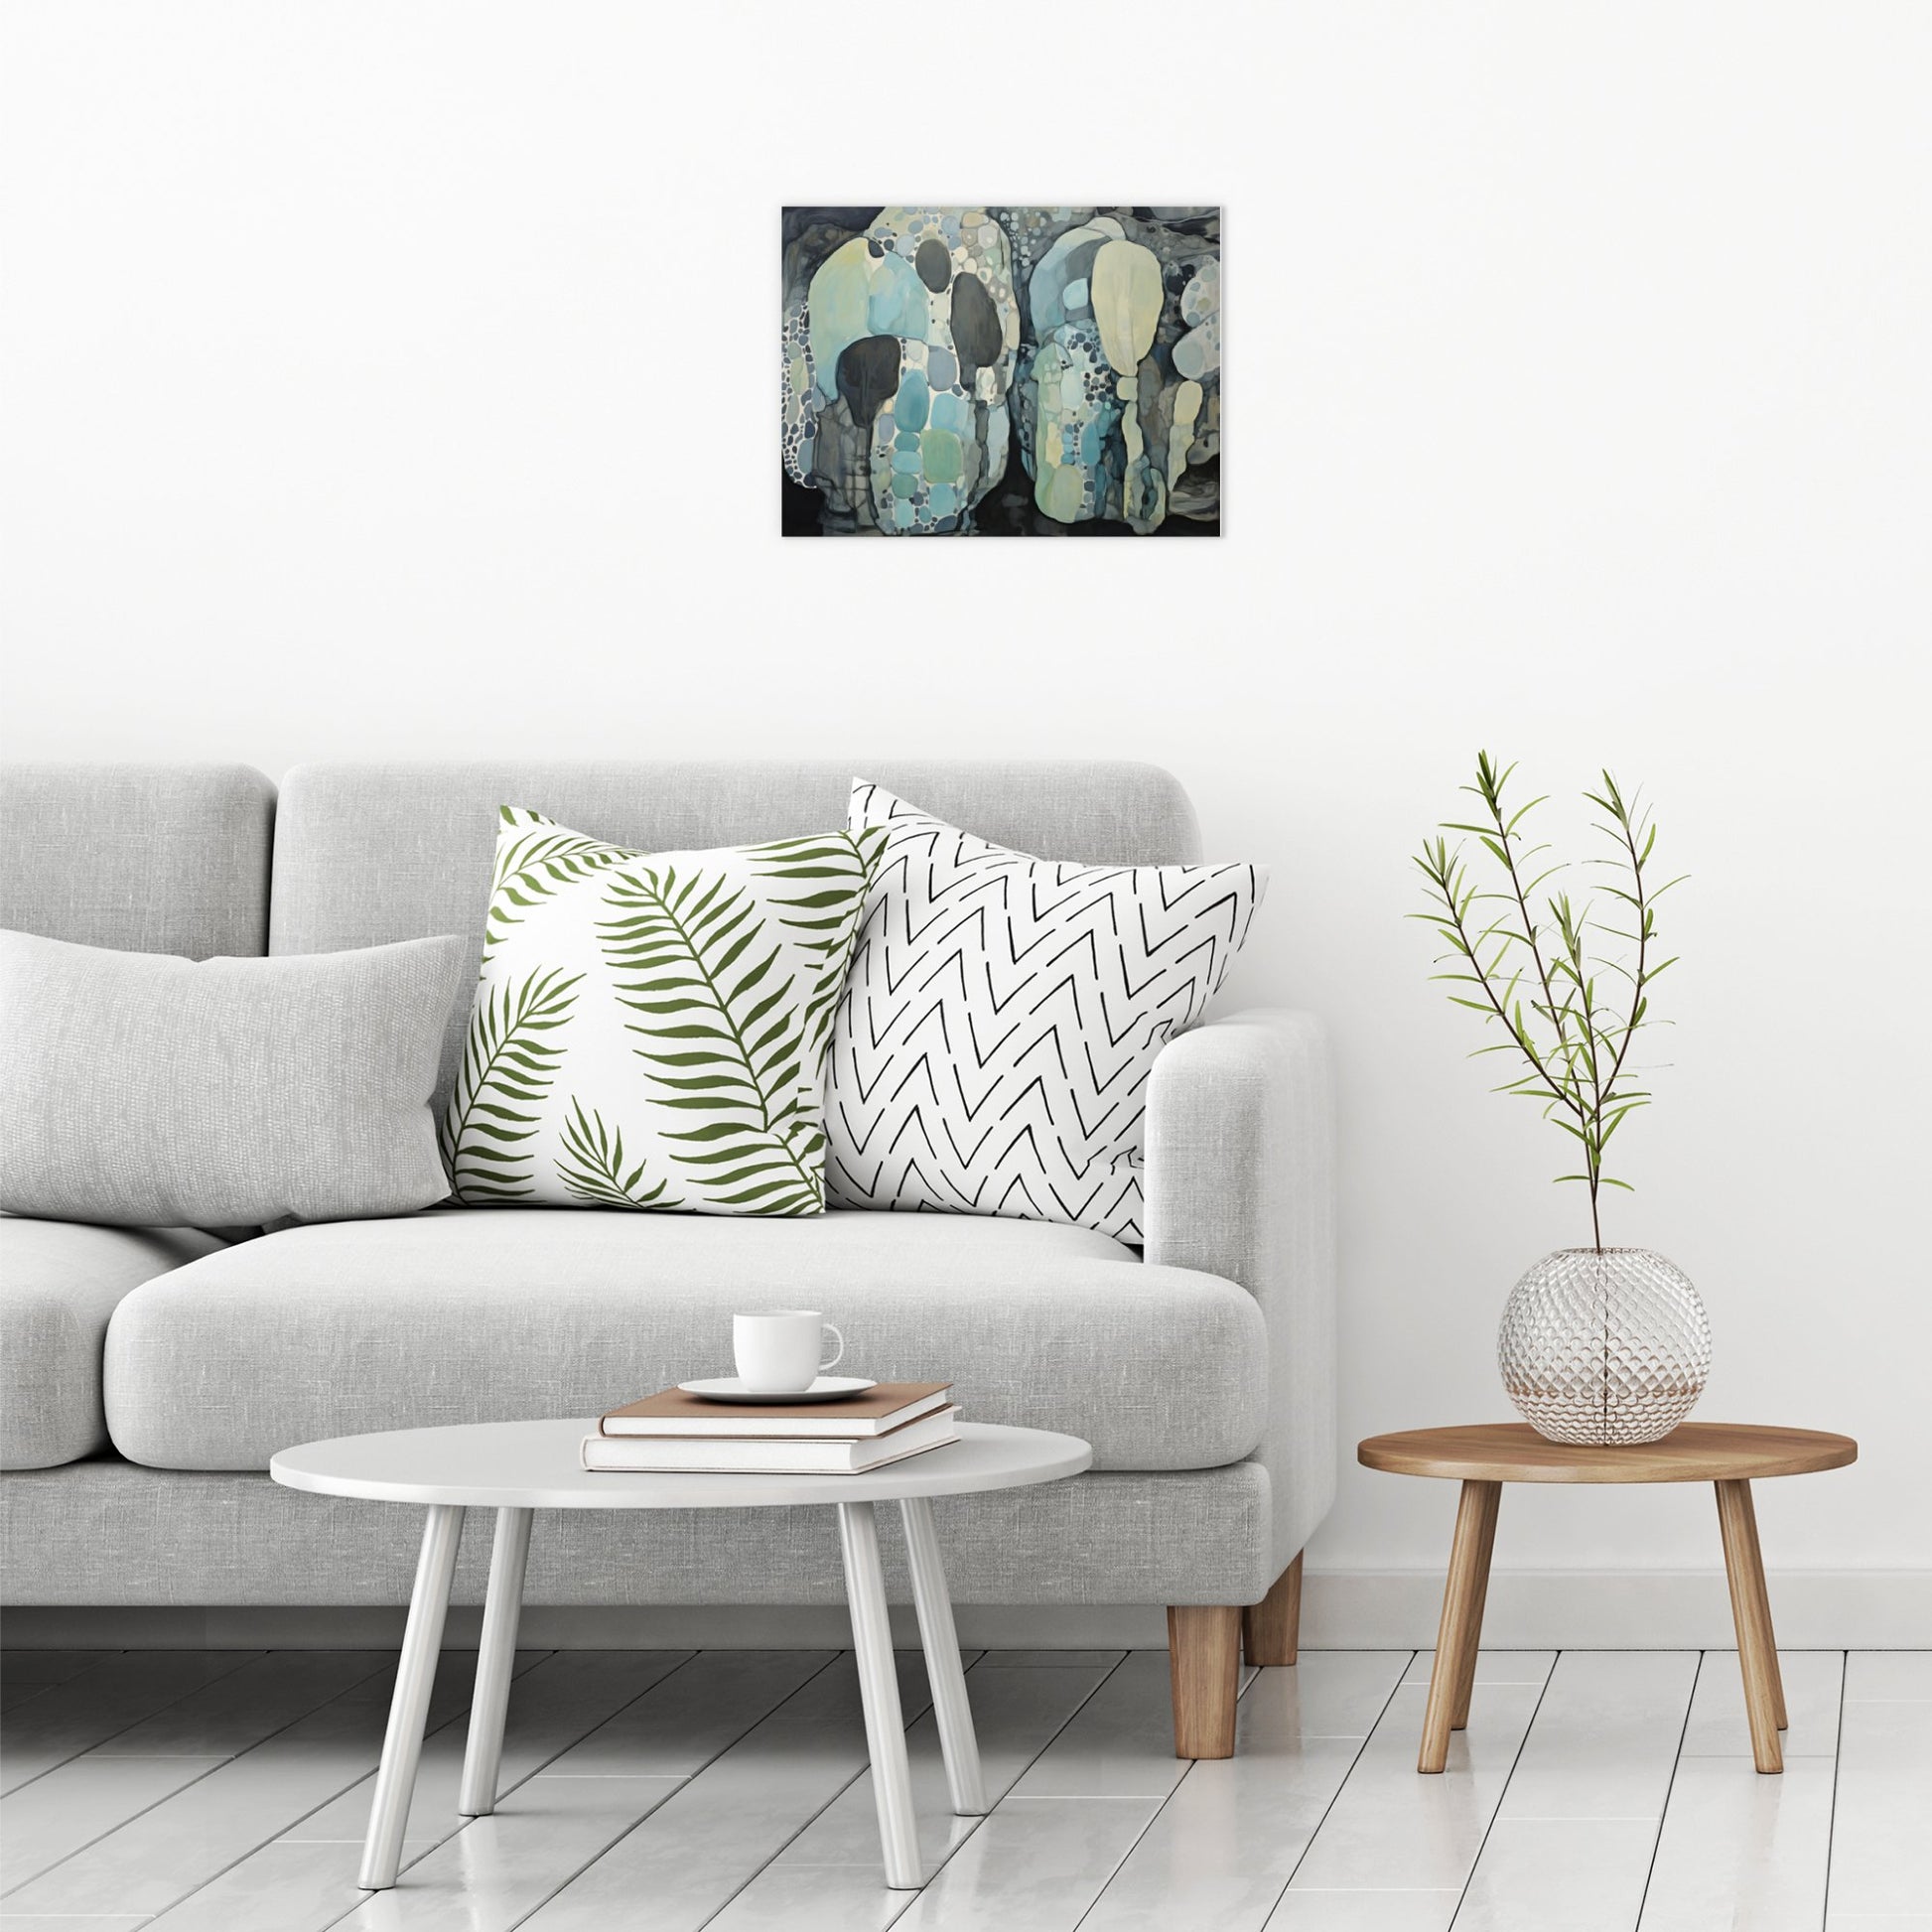 A contemporary modern room view showing a medium size metal art poster display plate with printed design of a Blue Rocks Abstract Painting